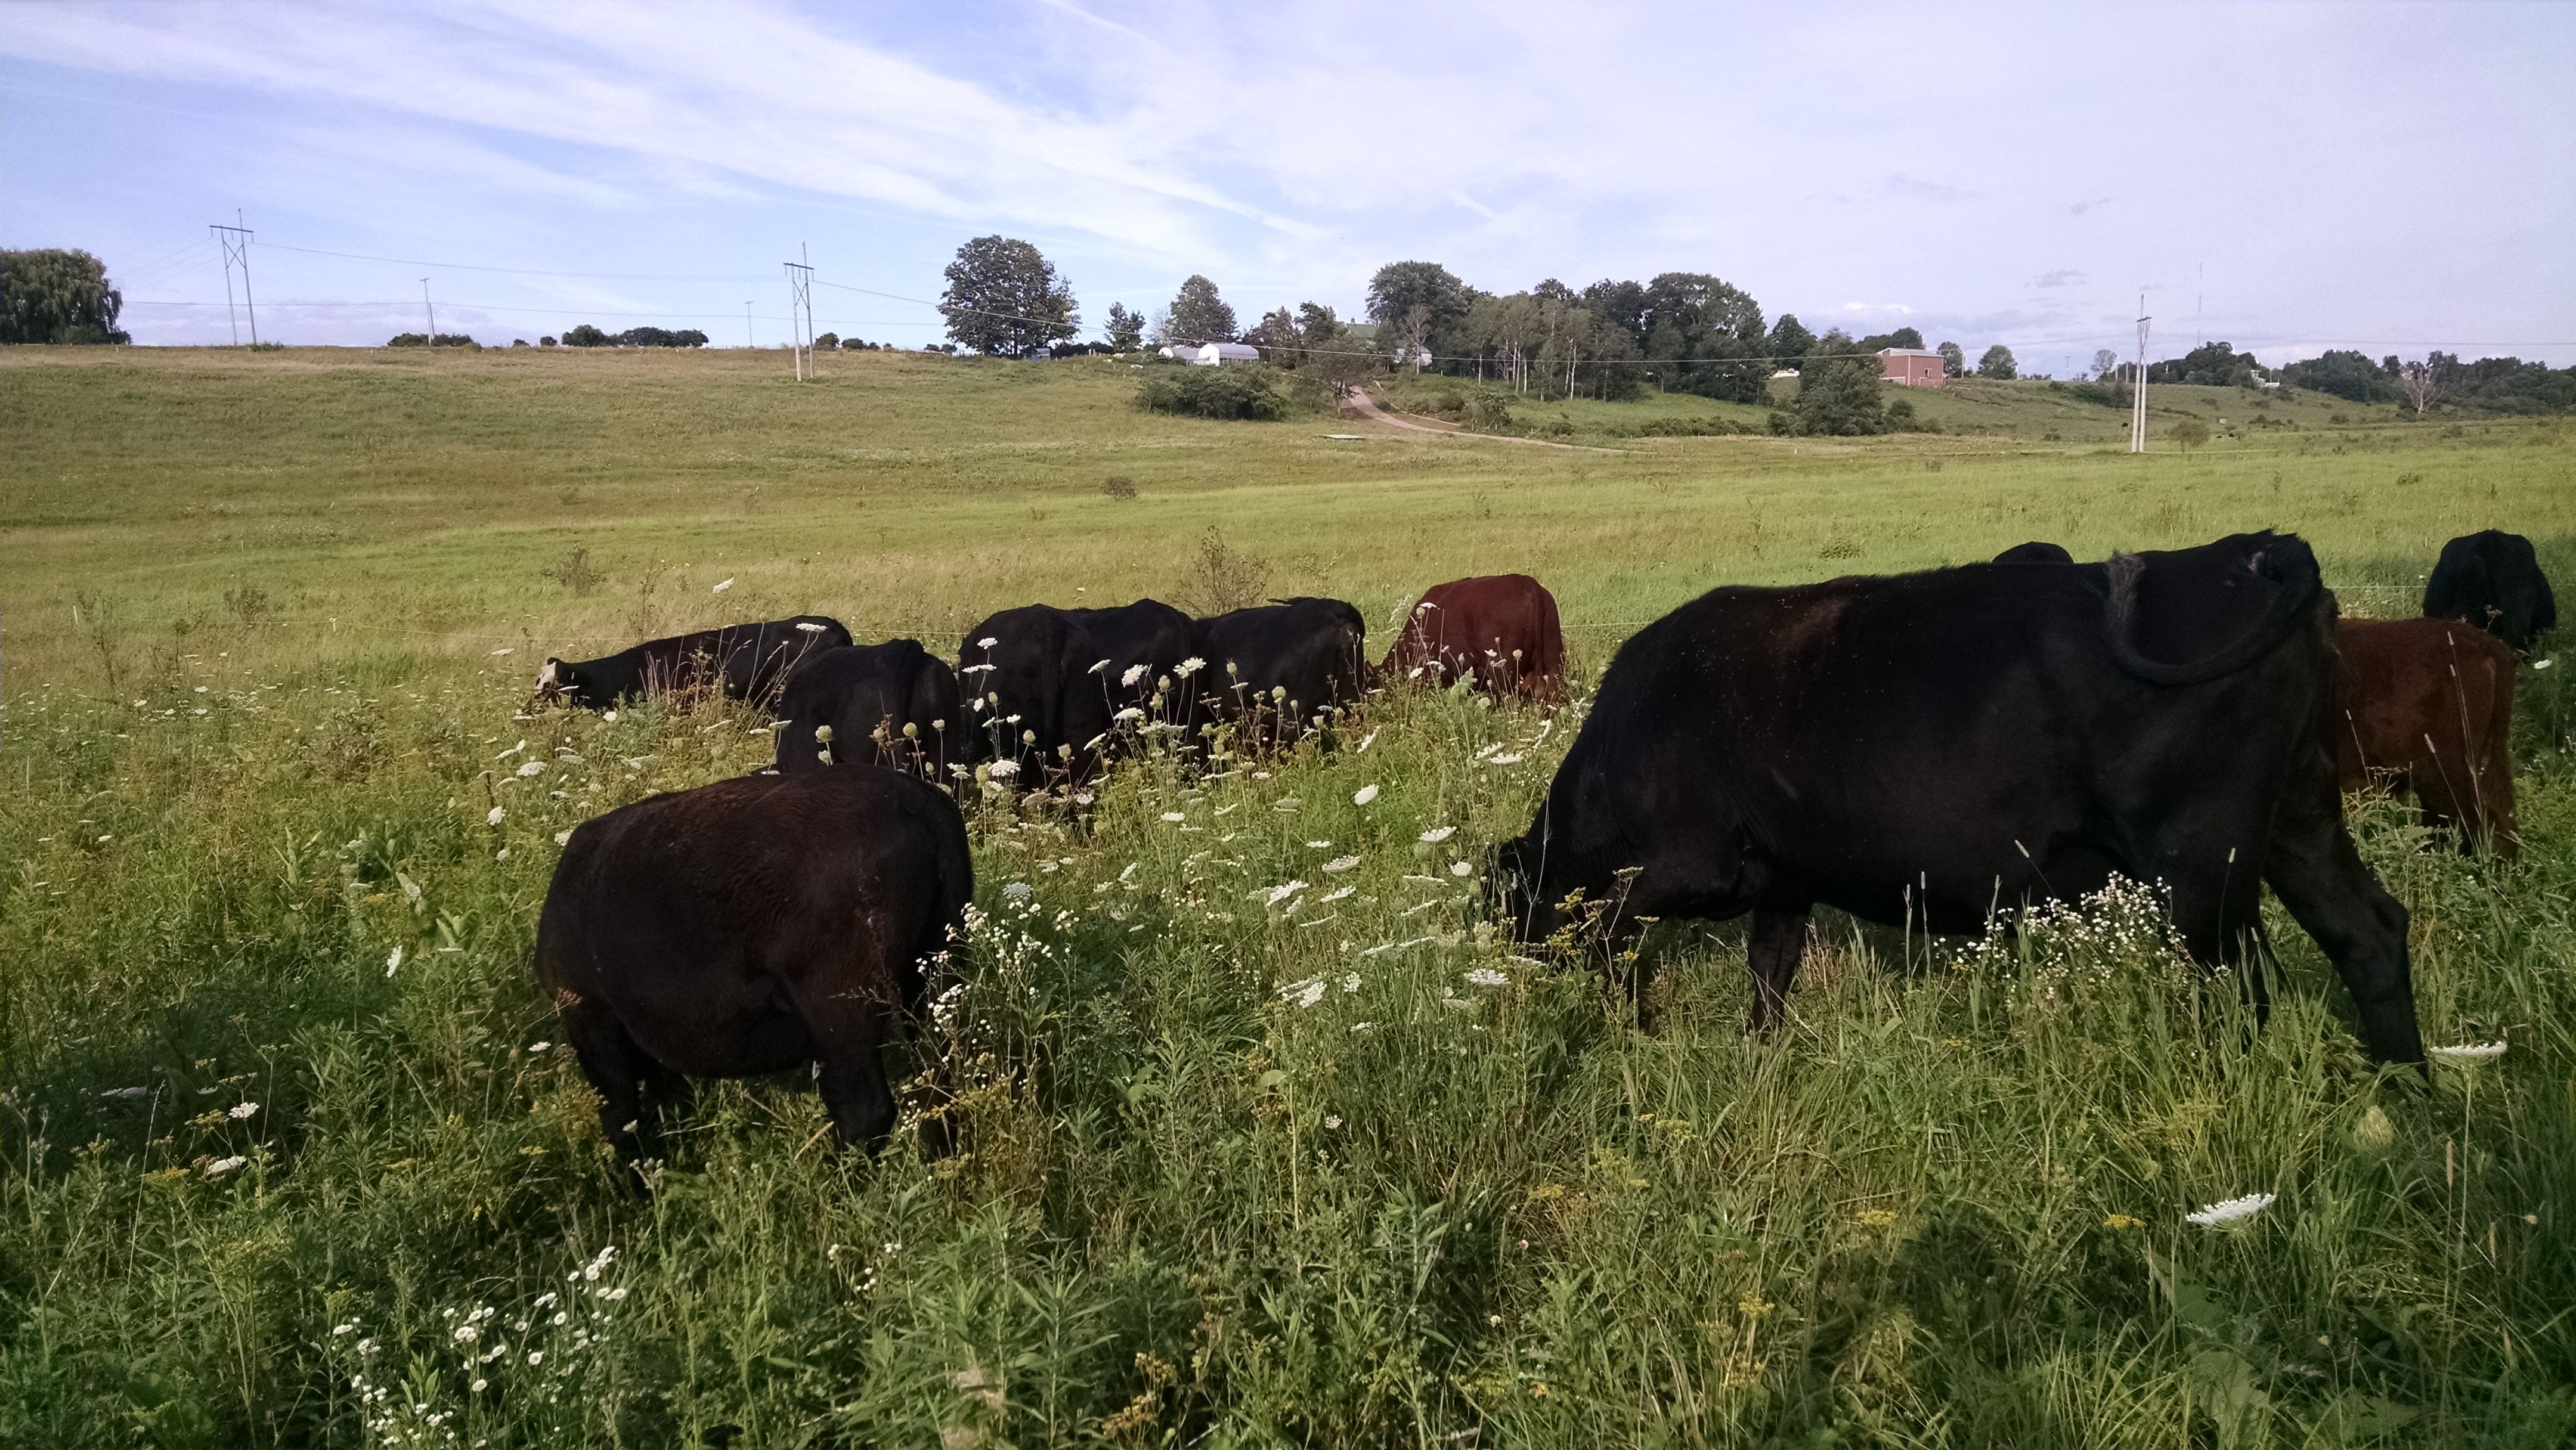 They were eager to get back into green grass after a few days eating hay and brush.